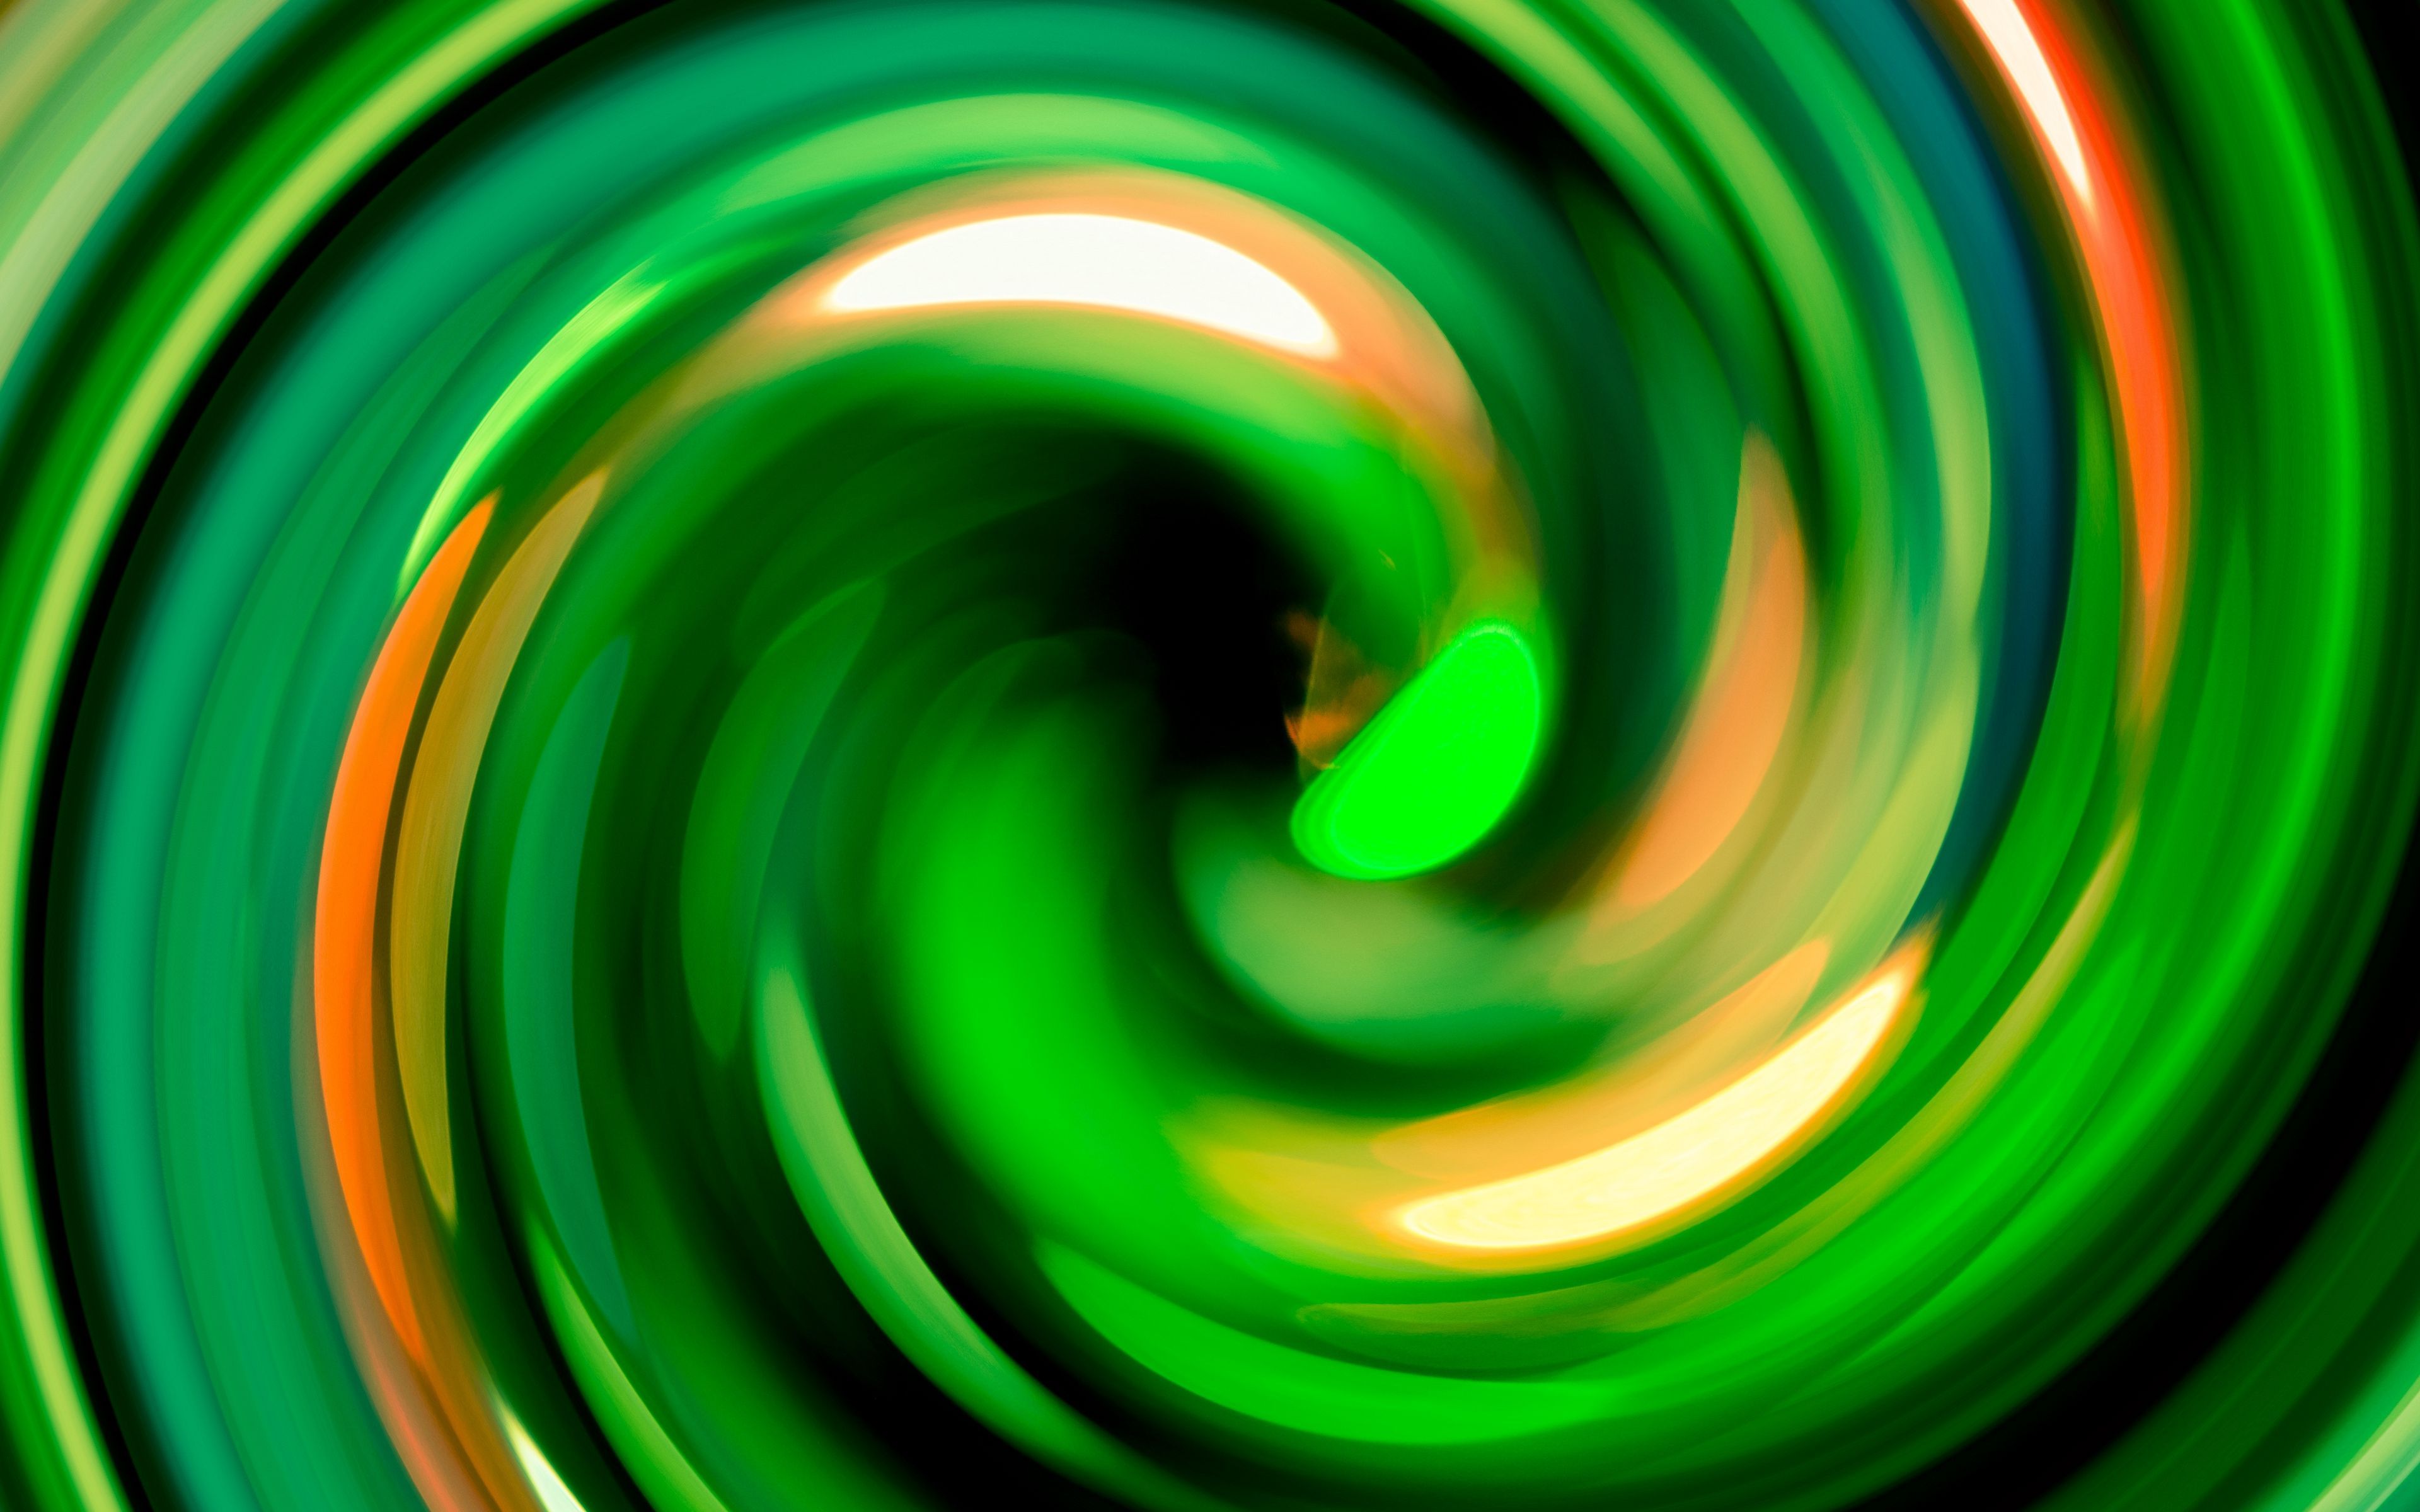 Download wallpaper 3840x2400 abstract, spiral, spin, green 4k